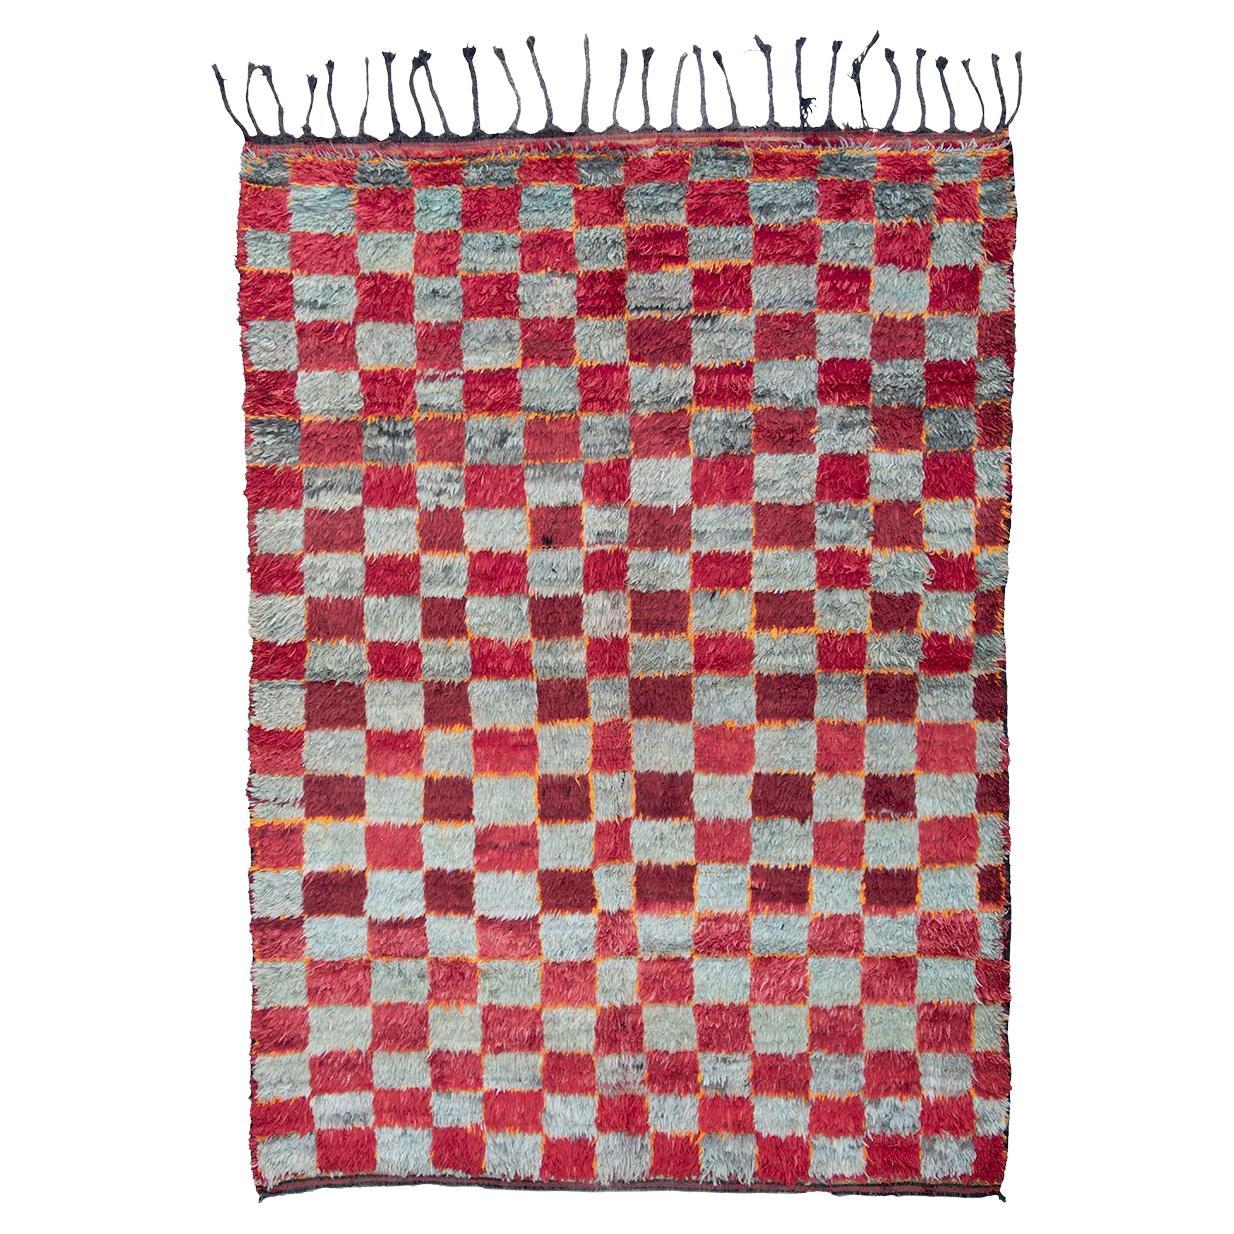 Moroccan Berber Rug with Checkerboard Pattern 'DK-119-10'